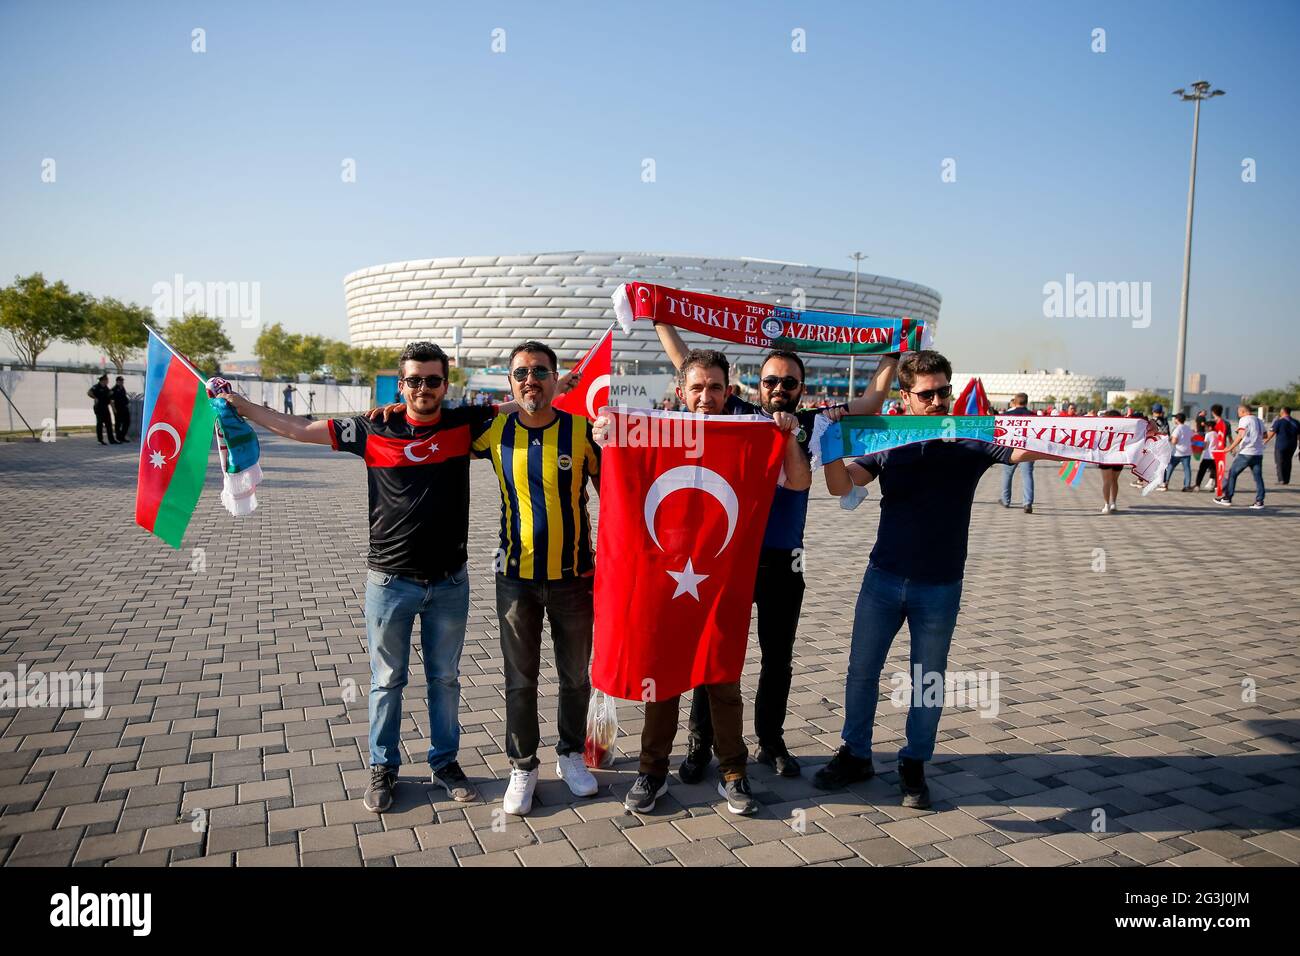 BAKU, AZERBAIJAN - JUNE 16: Turkish fans pose for a photo outside Baku Olympic Stadium during the UEFA Euro 2020 Championship Group A match between Turkey National Team and Wales National Team at Baku Olympic Stadium on June 16, 2021 in Baku, Azerbaijan (Photo by Orange Pictures) Stock Photo